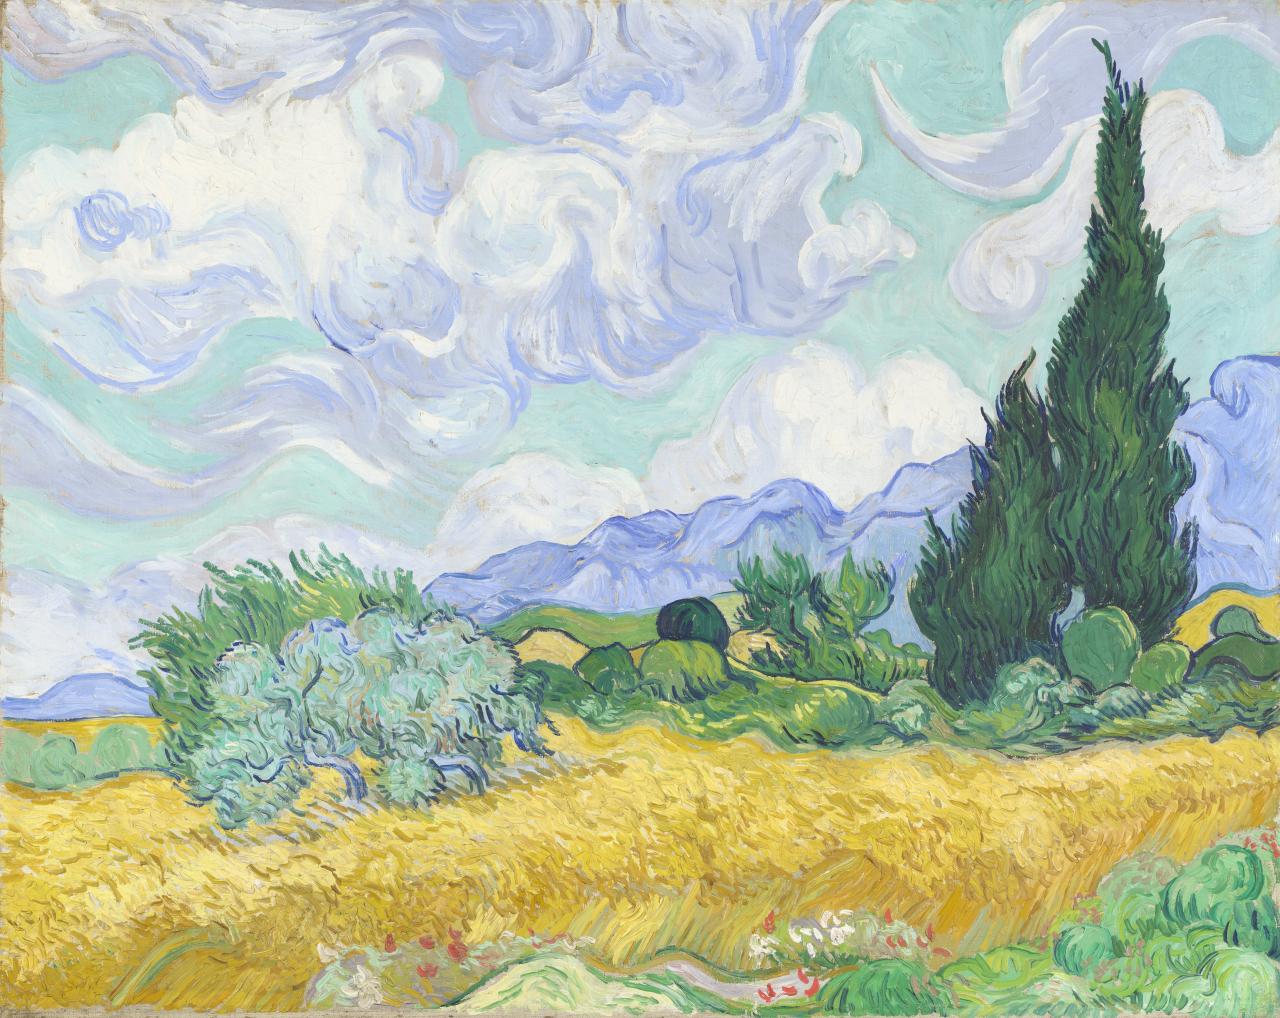 Vincent van Gogh A wheatfield, with cypresses early September 1889 Saint-Rémy oil on canvas 72.1 x 90.9 cm F 615, JH 1755 National Gallery, London Bought, Courtauld Fund, 1923 (NG3861) © The National Gallery, London Photo: The National Gallery, London 